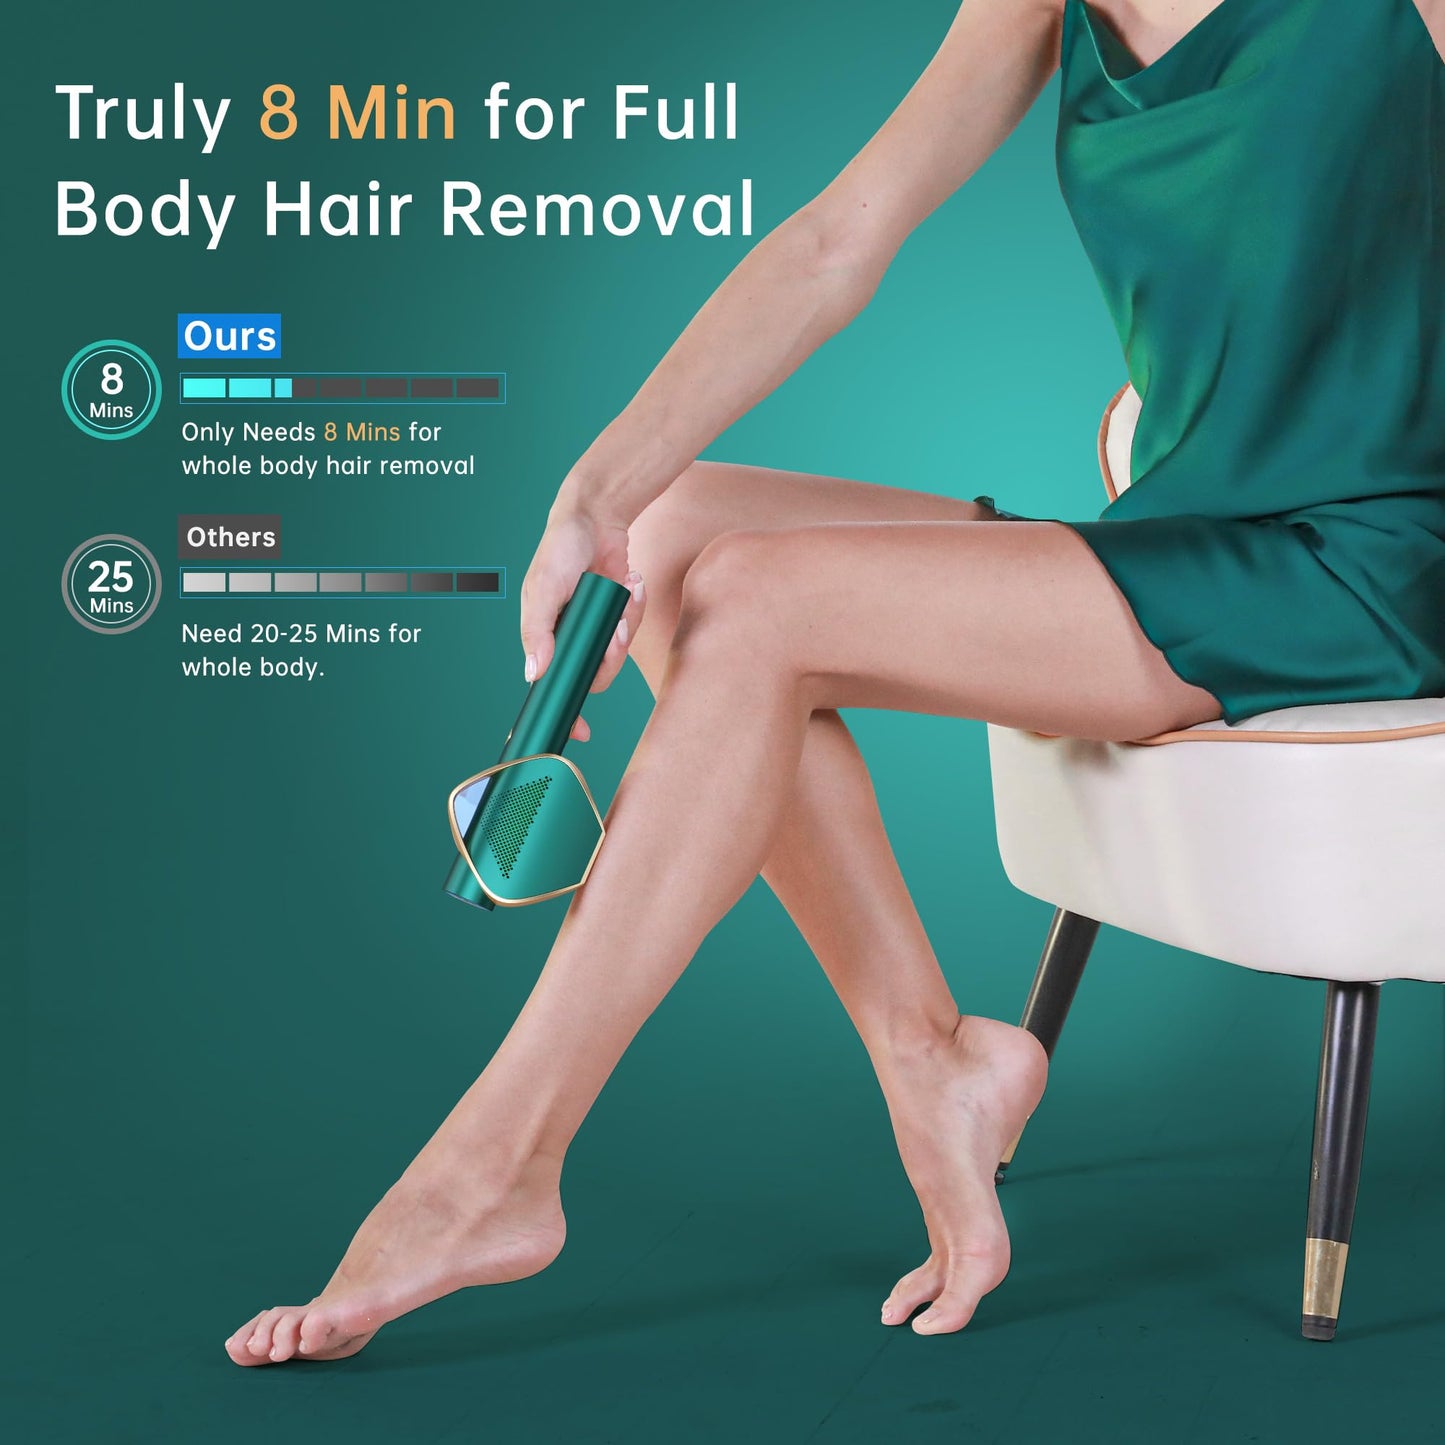 D-1196B 3 in 1 IPL Hair Removal Device Only €67.99 At Amazon prime day!